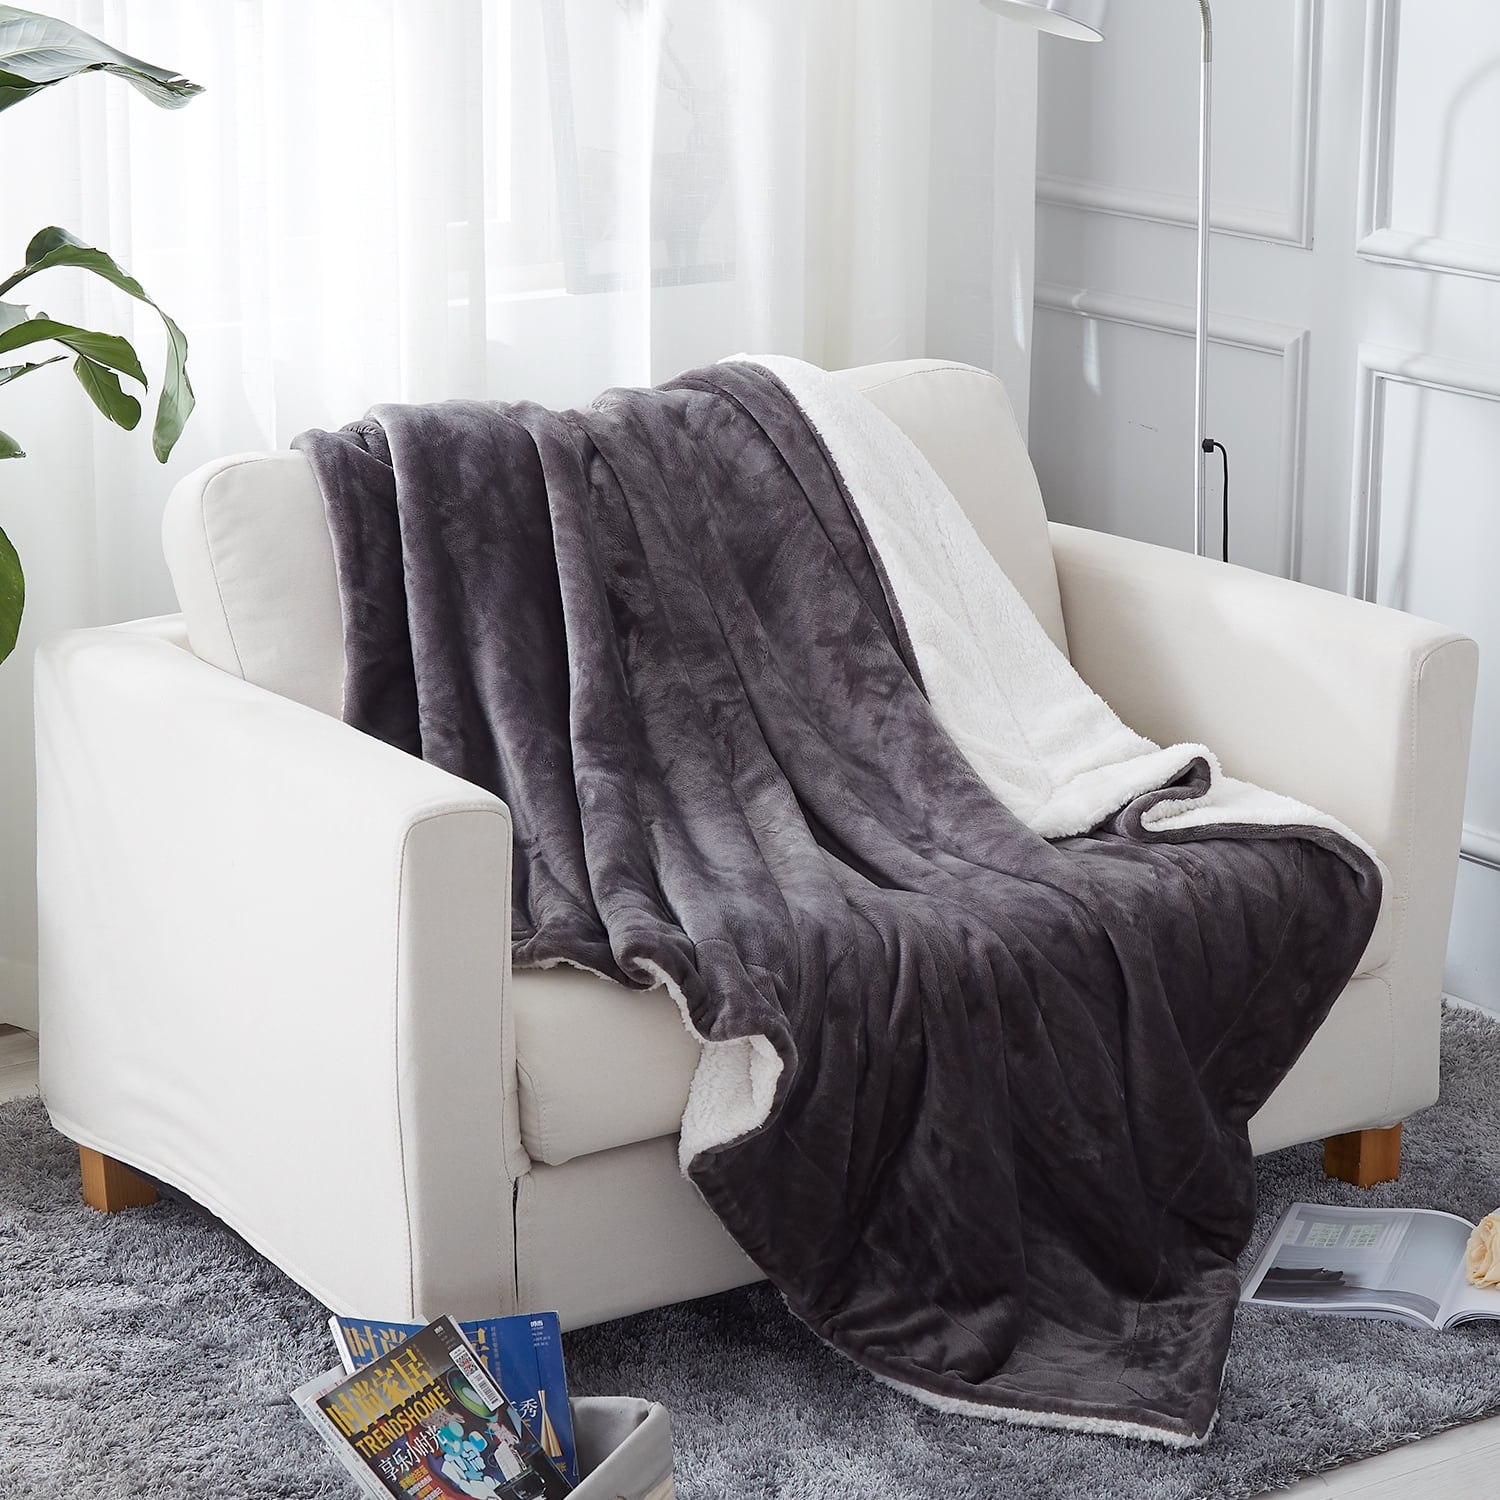 HOT SALE ON Luxury Warm Soft FleeceThrows With Sherpa Reverse Neutral Colours 